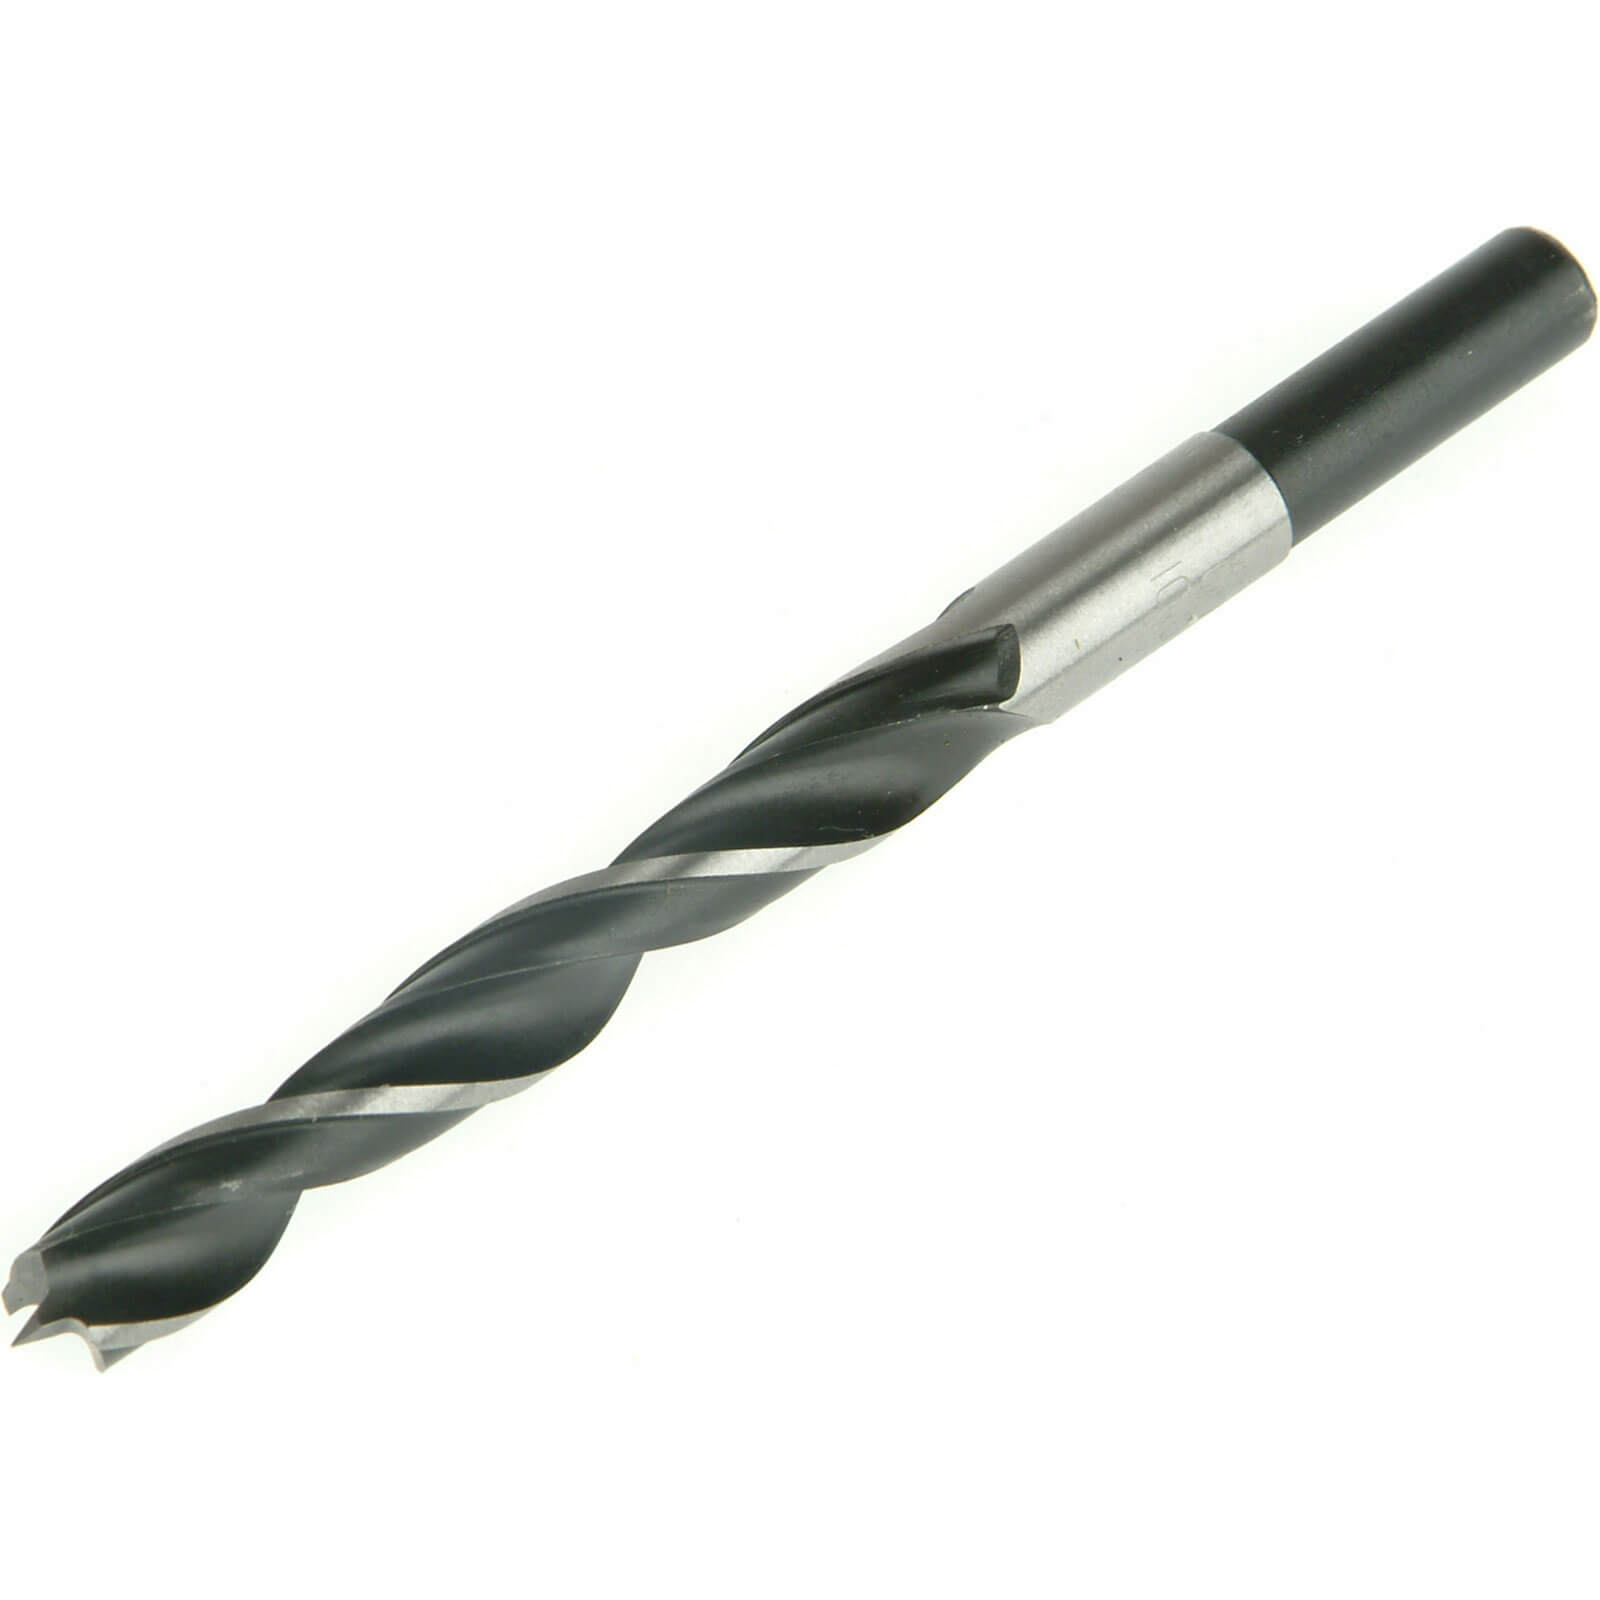 Photo of Faithfull Lip And Spur Wood Drill Bit 10mm